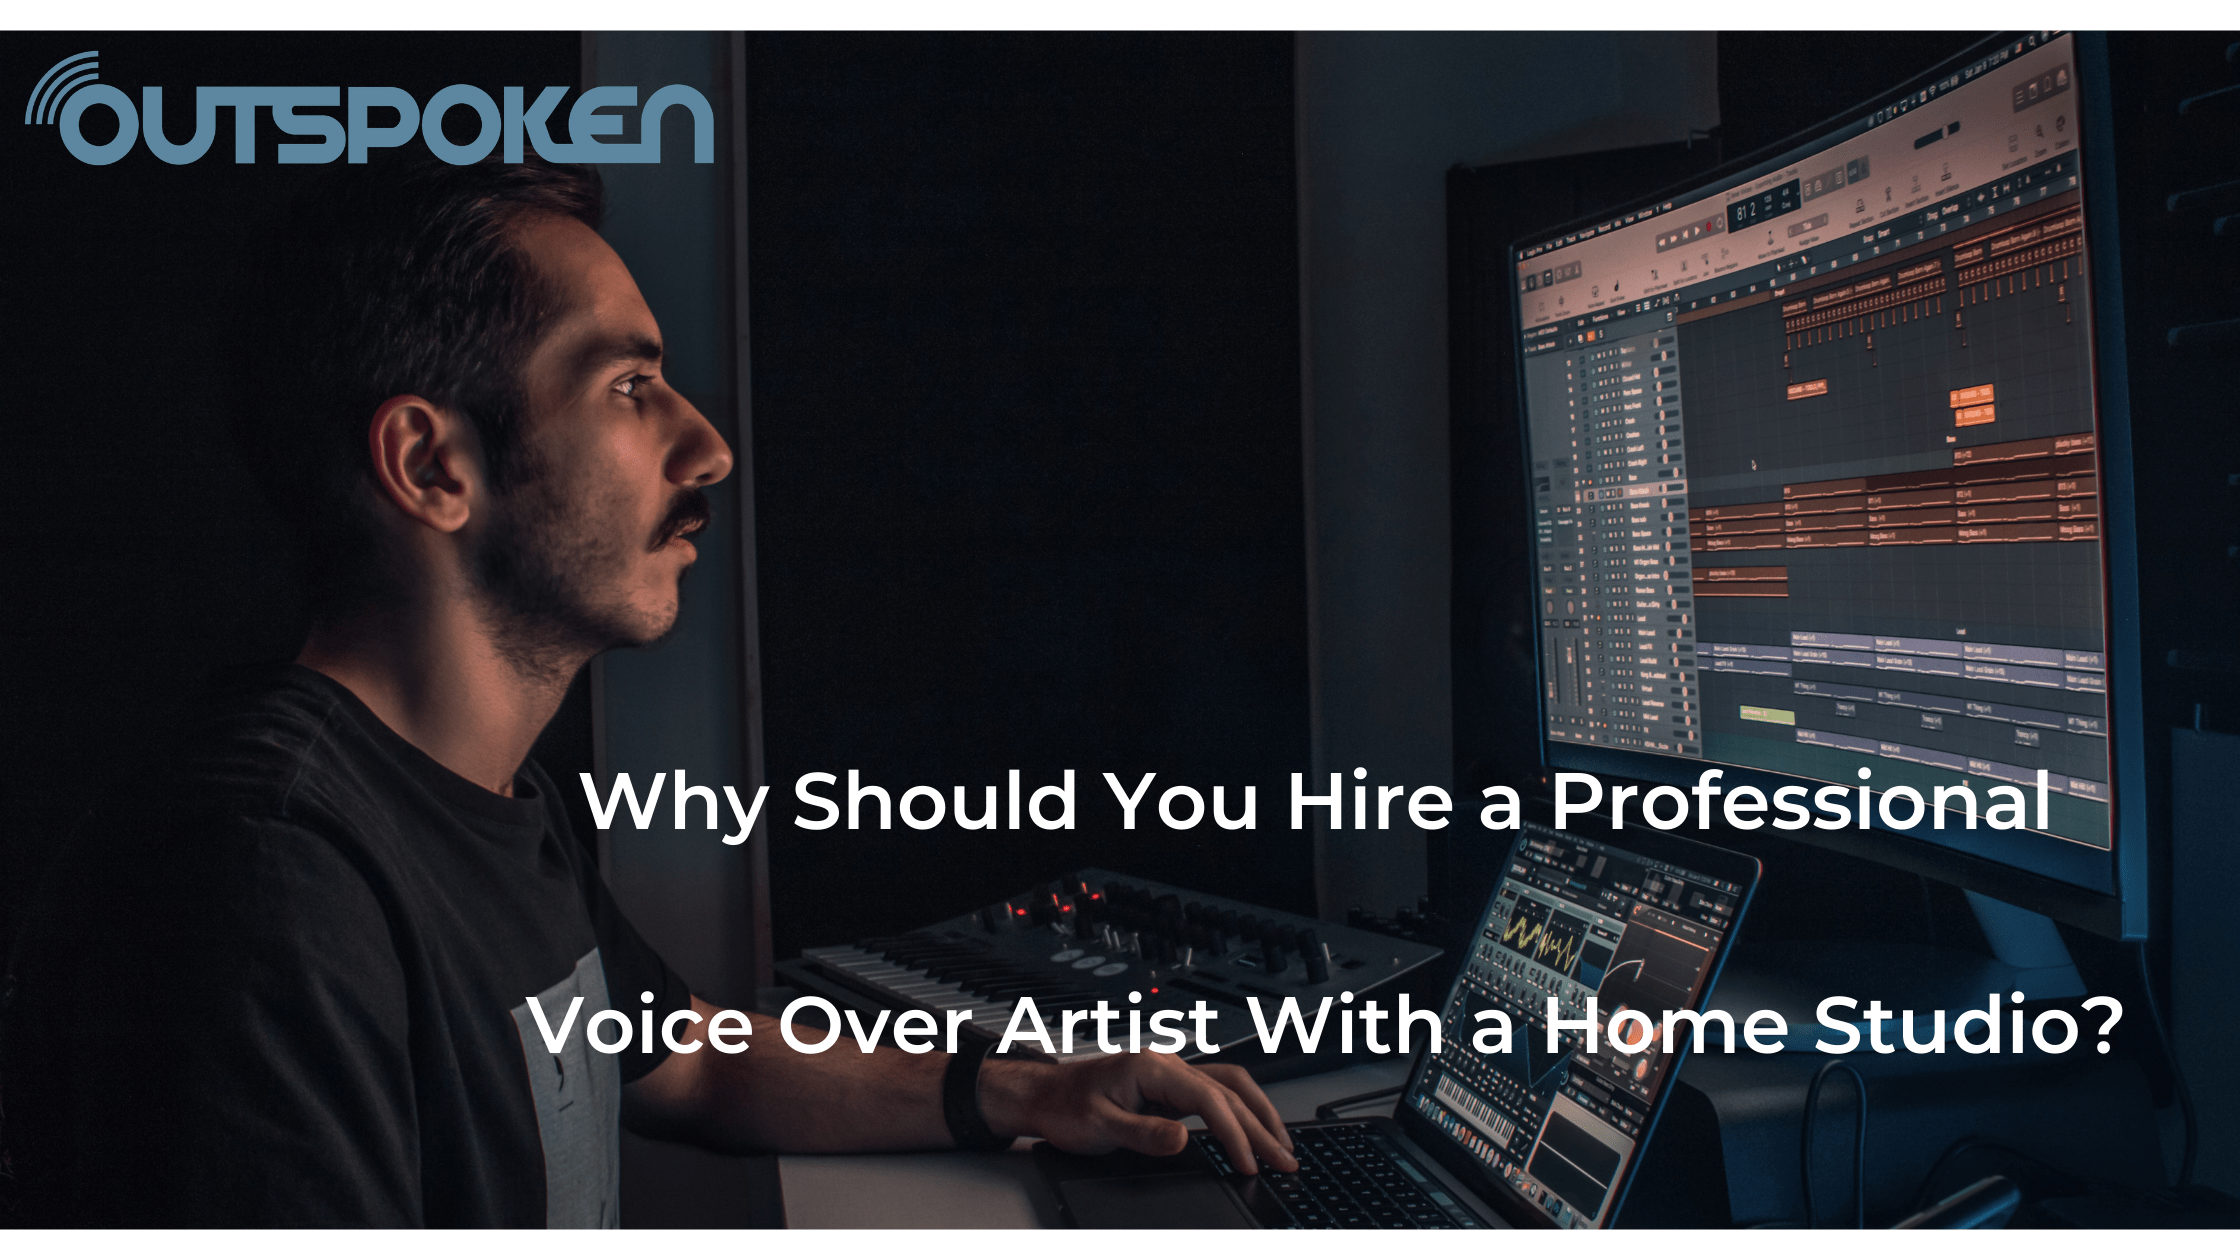 Why Should You Hire a Professional Voice Over Artist With a Home Studio?